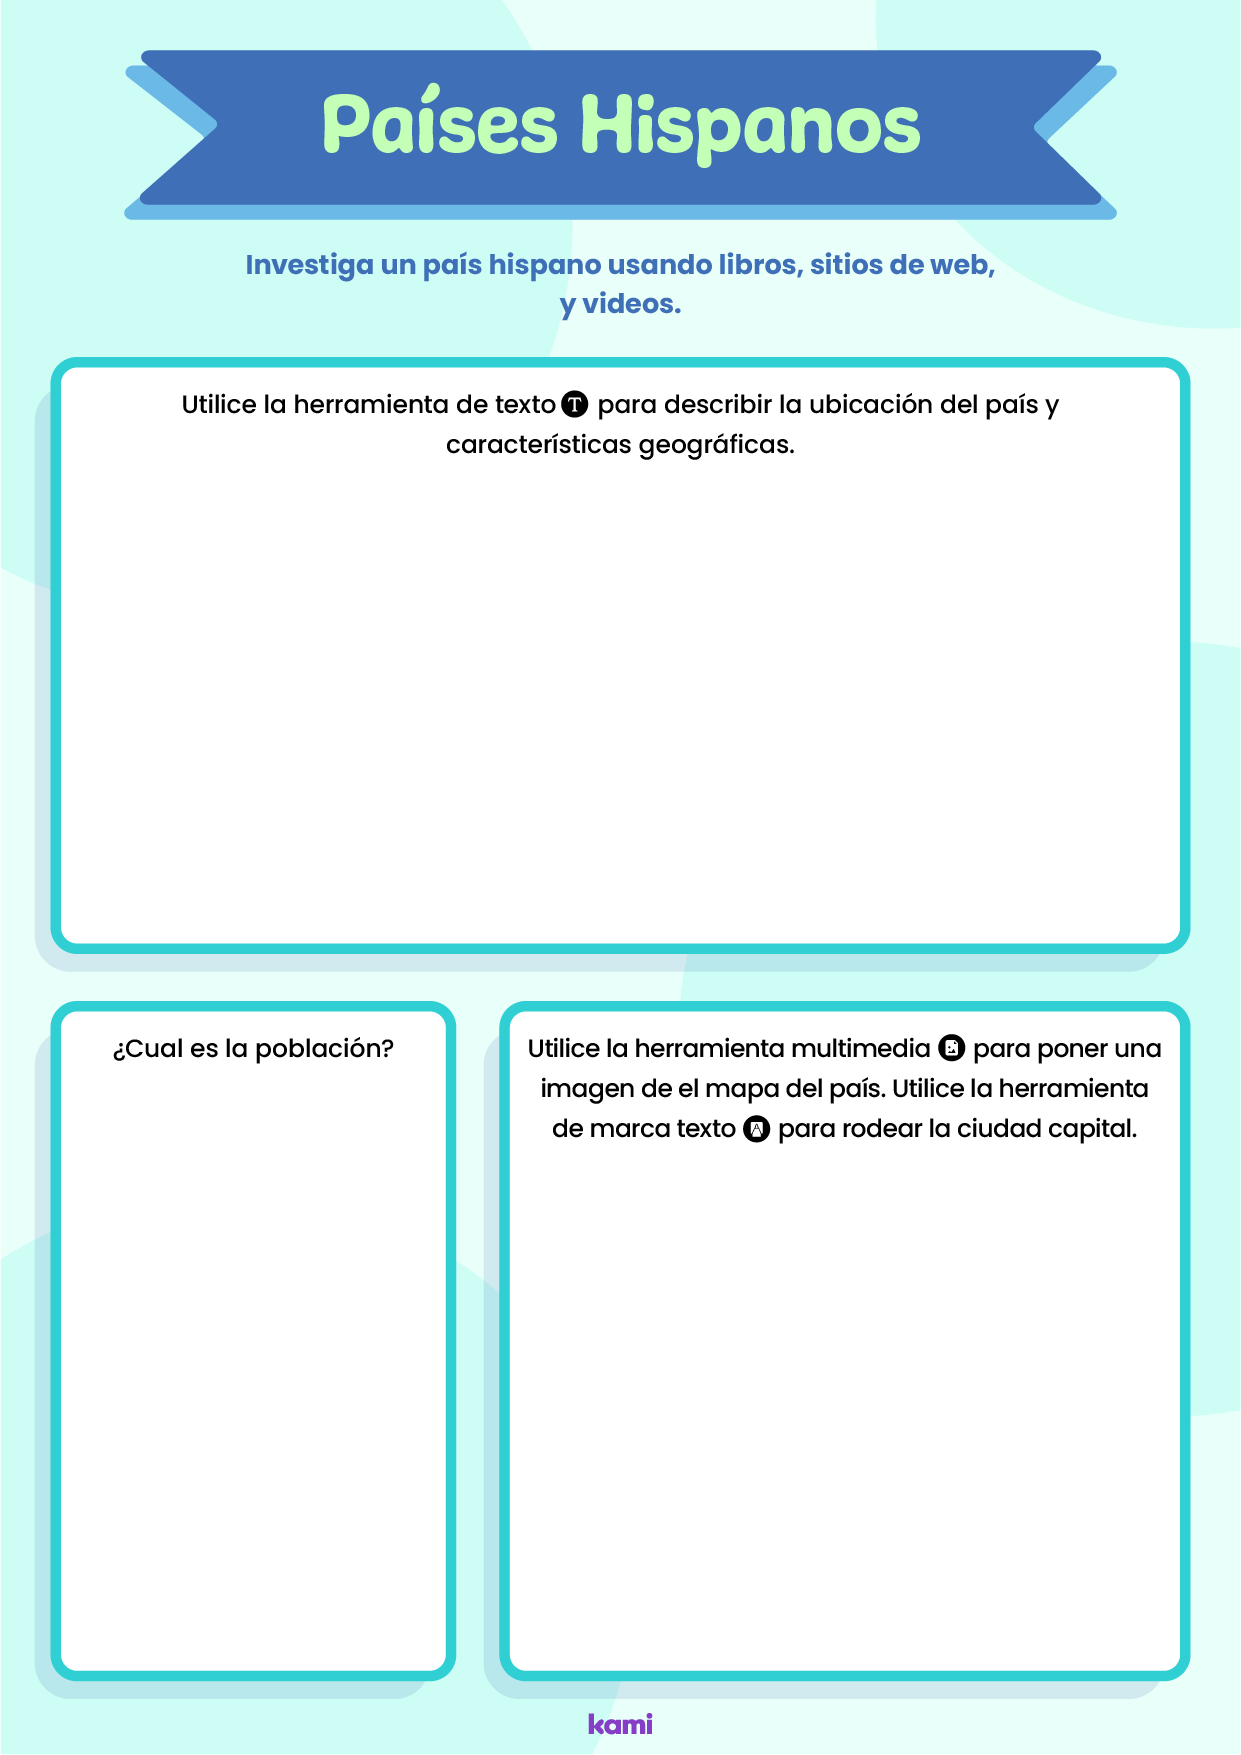 A worksheet for Hispanic Heritage month with a translated Spanish version.